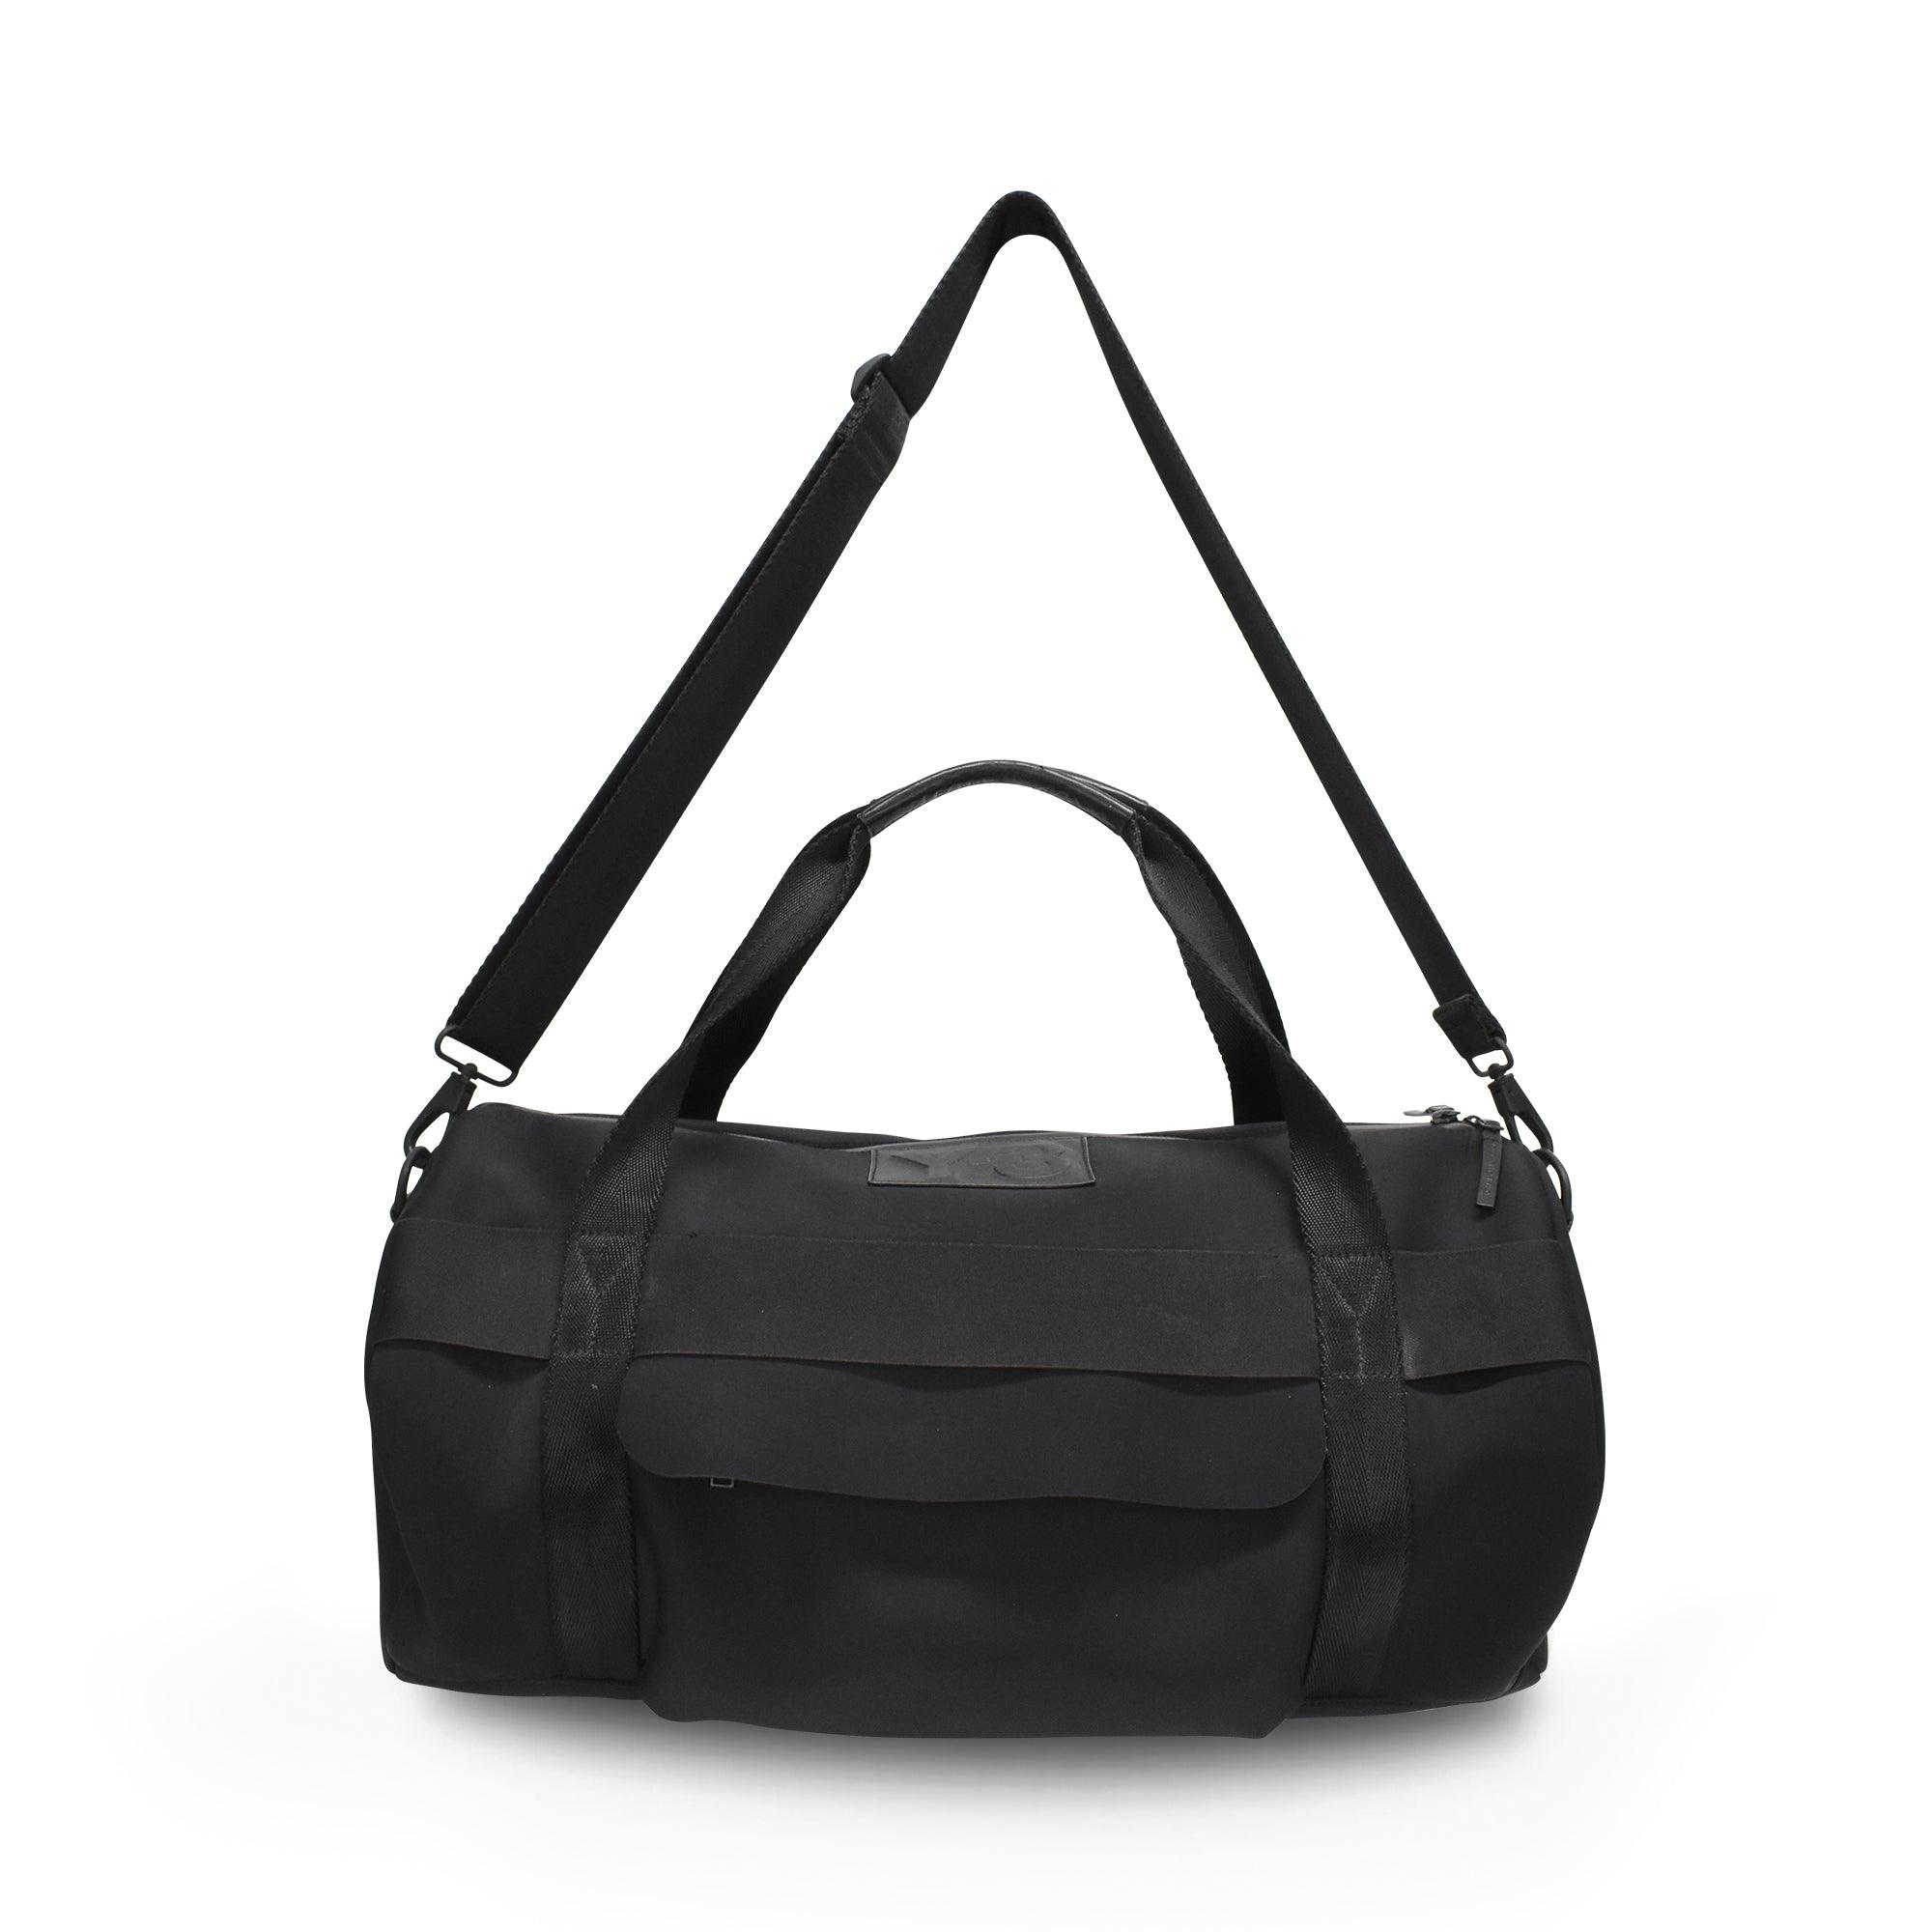 Y3 Duffle Bag - Fashionably Yours